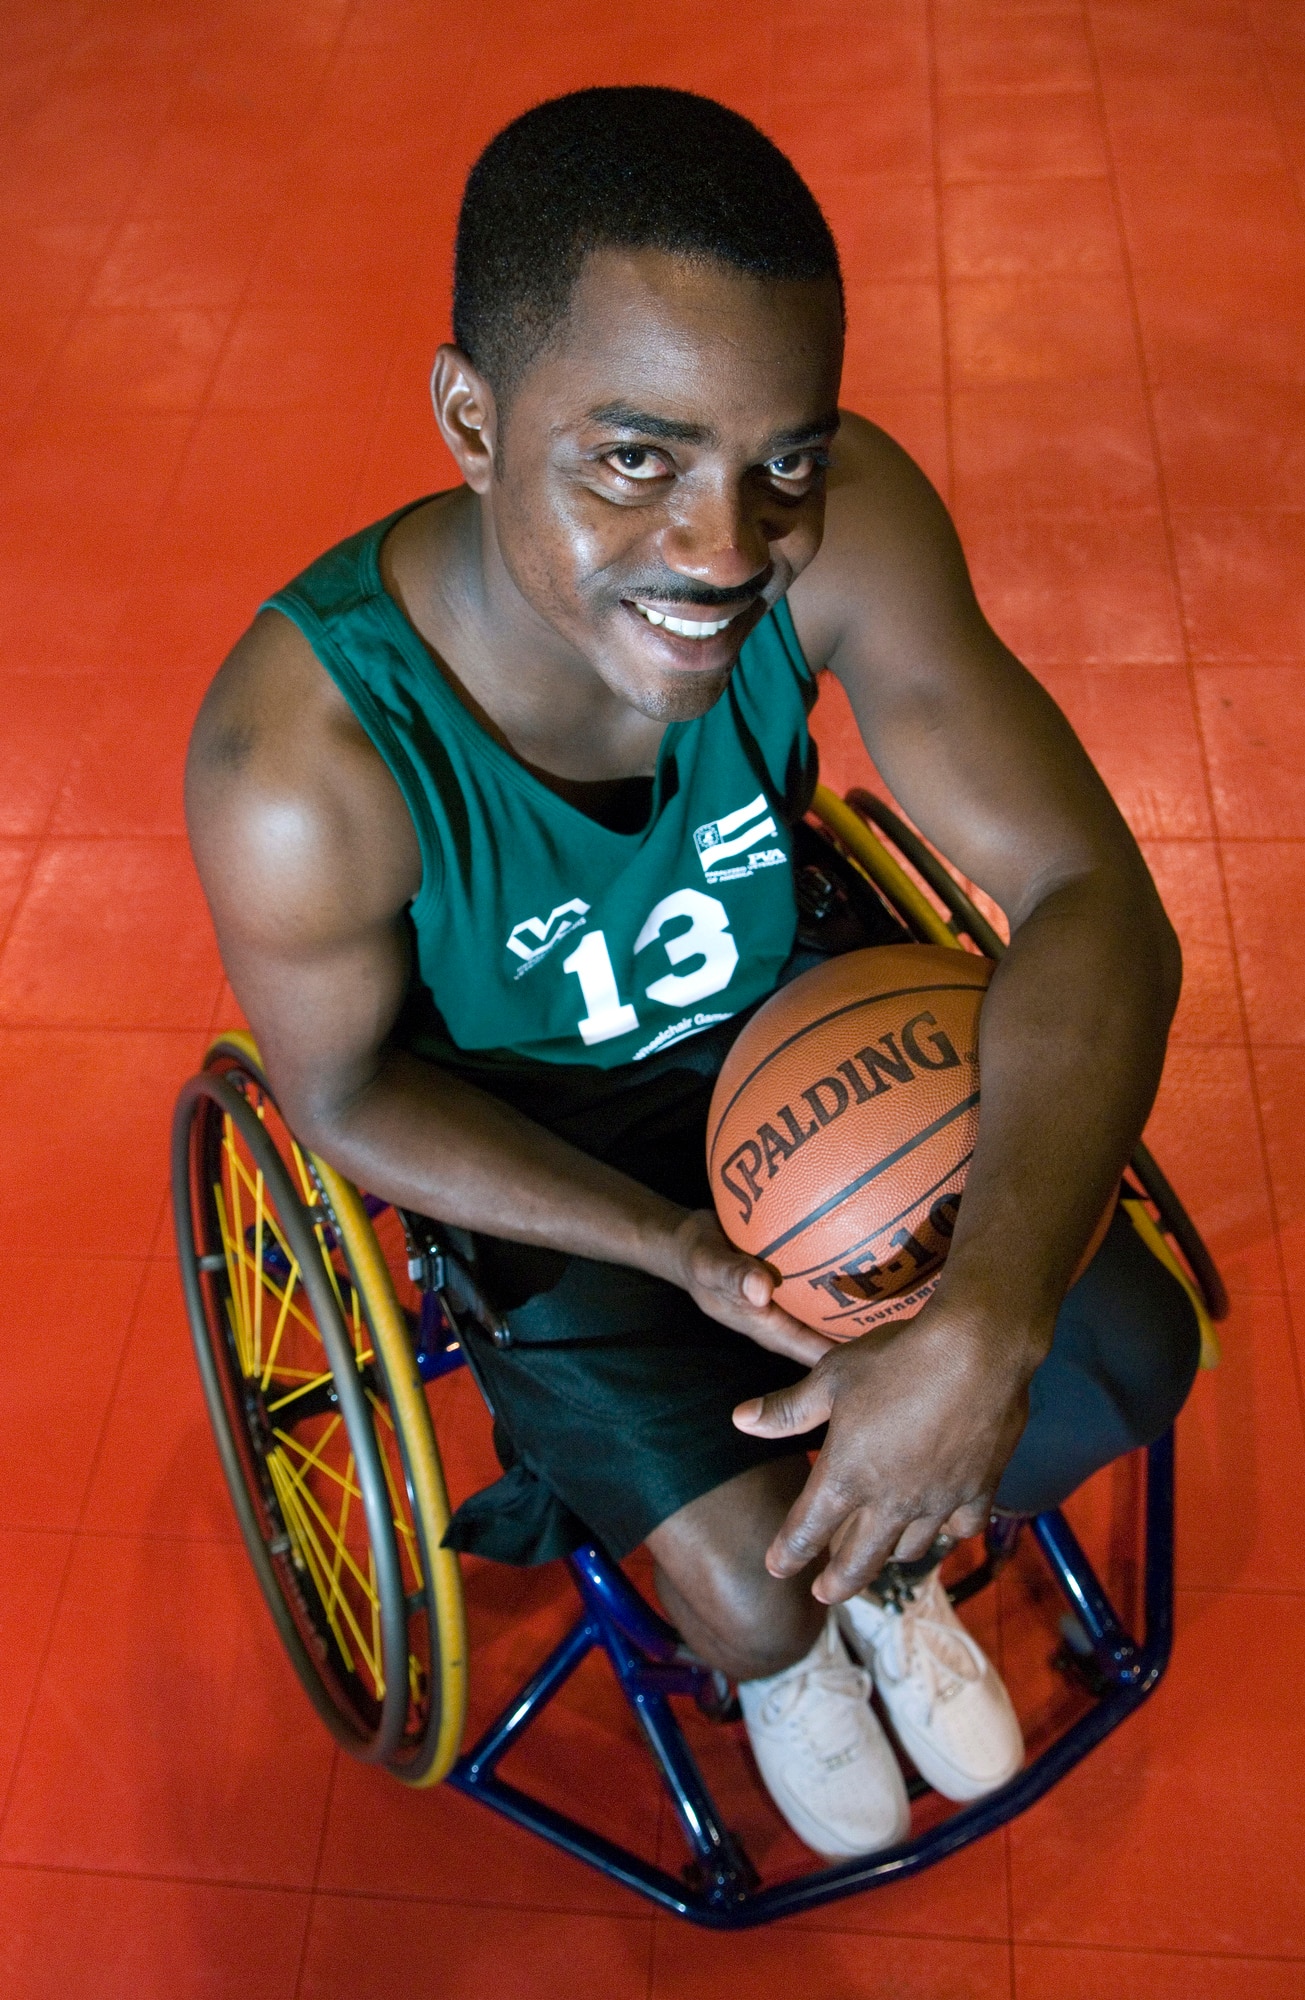 Tech. Sgt. Anthony Felder, competing in his second National Veterans Wheelchair Games, July 29, held in Omaha, Neb., helped his team to earn the gold medal in basketball. Tech. Sgt. Felder lost his left leg in a 2006 motorcycle accident but has received U.S. Air Force approval to remain on active duty as an F-15 crew chief. Tech. Sgt. Felder is currently stationed as an active-duty patient at Andrews Air Force Base, MD.
(U.S. Air Force photo/Staff Sgt. Bennie J. Davis III)